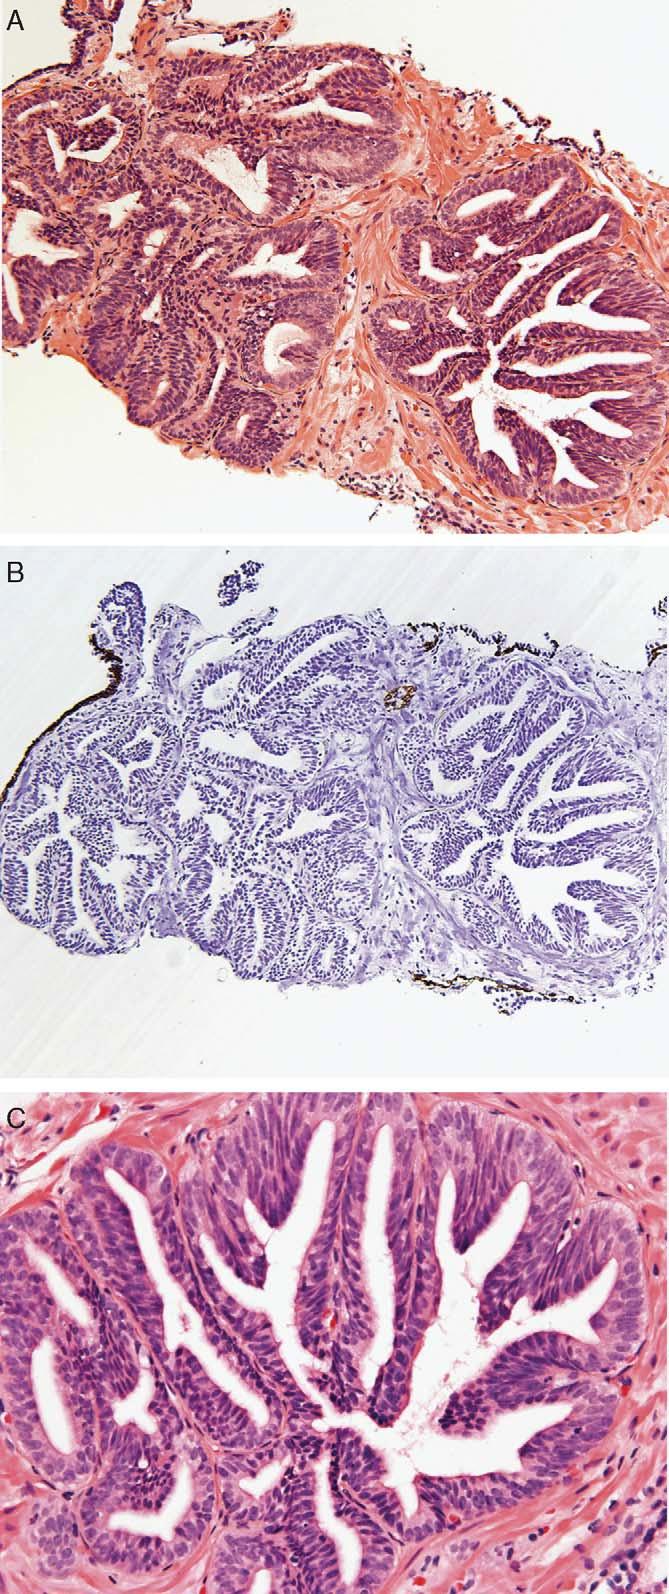 B, p63 immunohistochemical study showing absence of basal cells in PIN-like ductal adenocarcinoma glands. showing proximity and others away from PIN-like ductal adenocarcinoma.